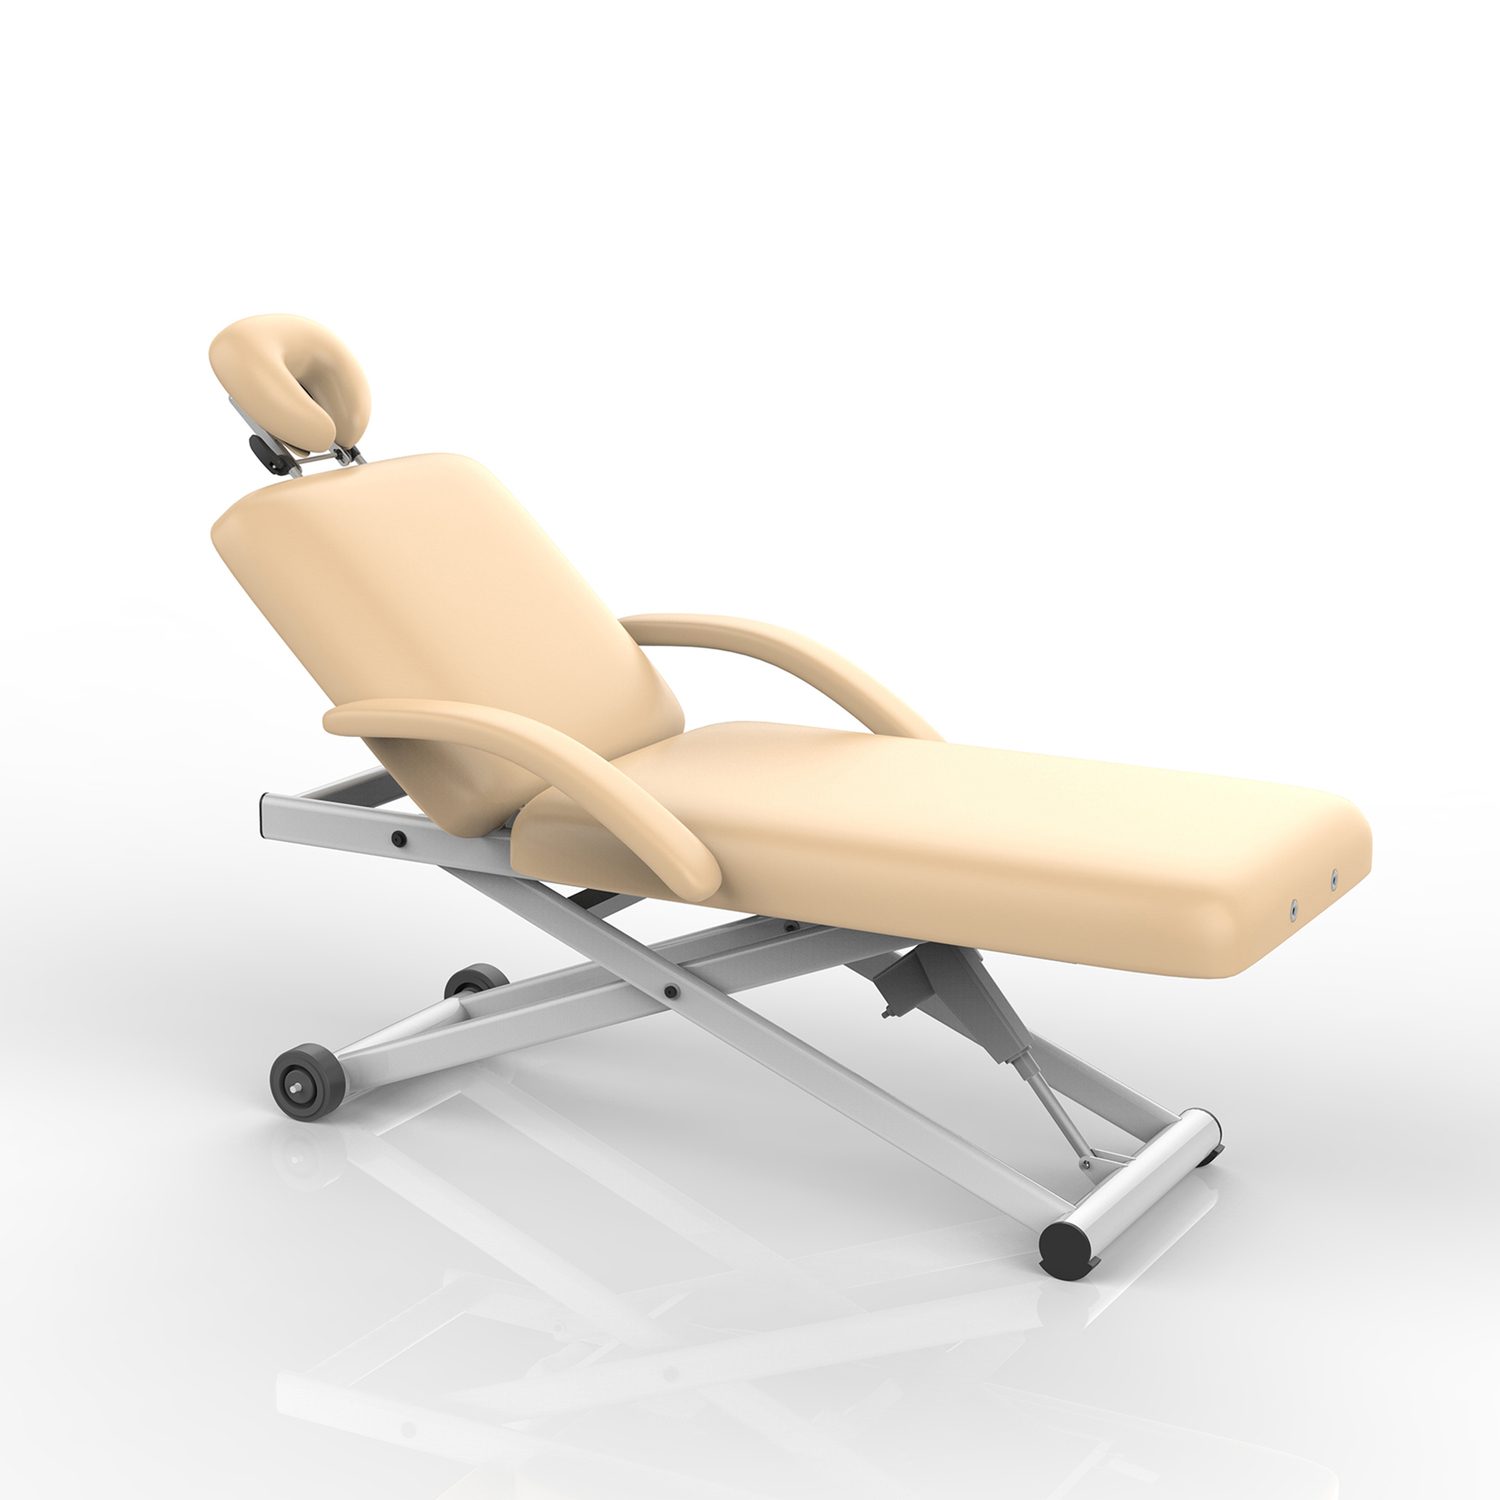 Treatment Beds, Exam Tables & Power Chairs Archives - Aesthetic Record  Marketplace